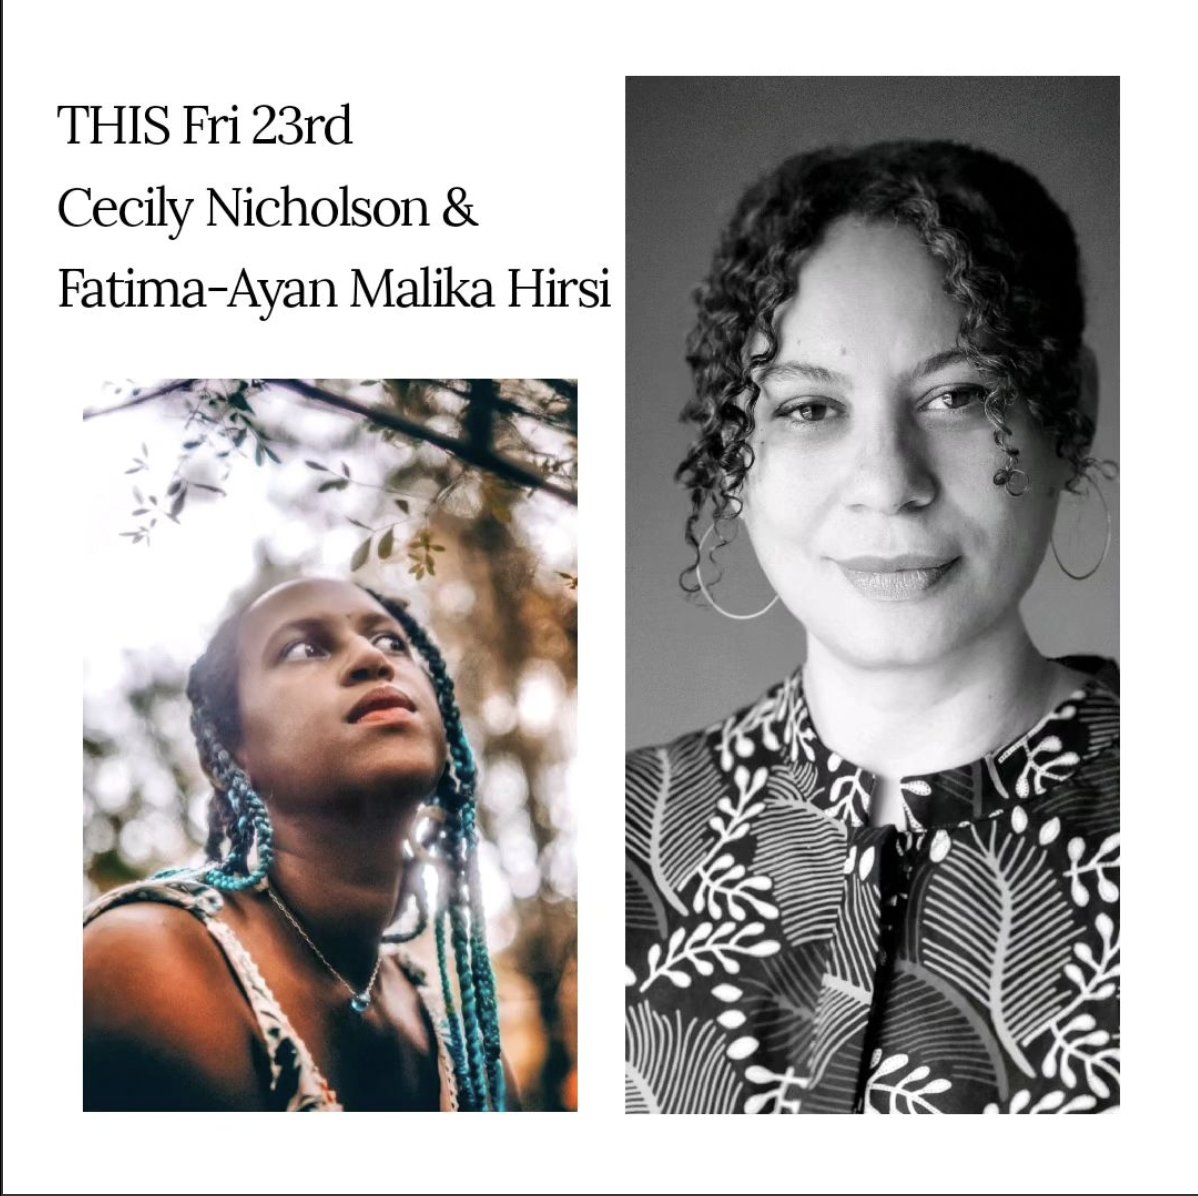 From Planet Earth Poetry, catch a reading from Cecily Nicholson and Fatima-Ayan Maliki Hirsi at Russell Books tomorrow evening at 7:30 p.m.!